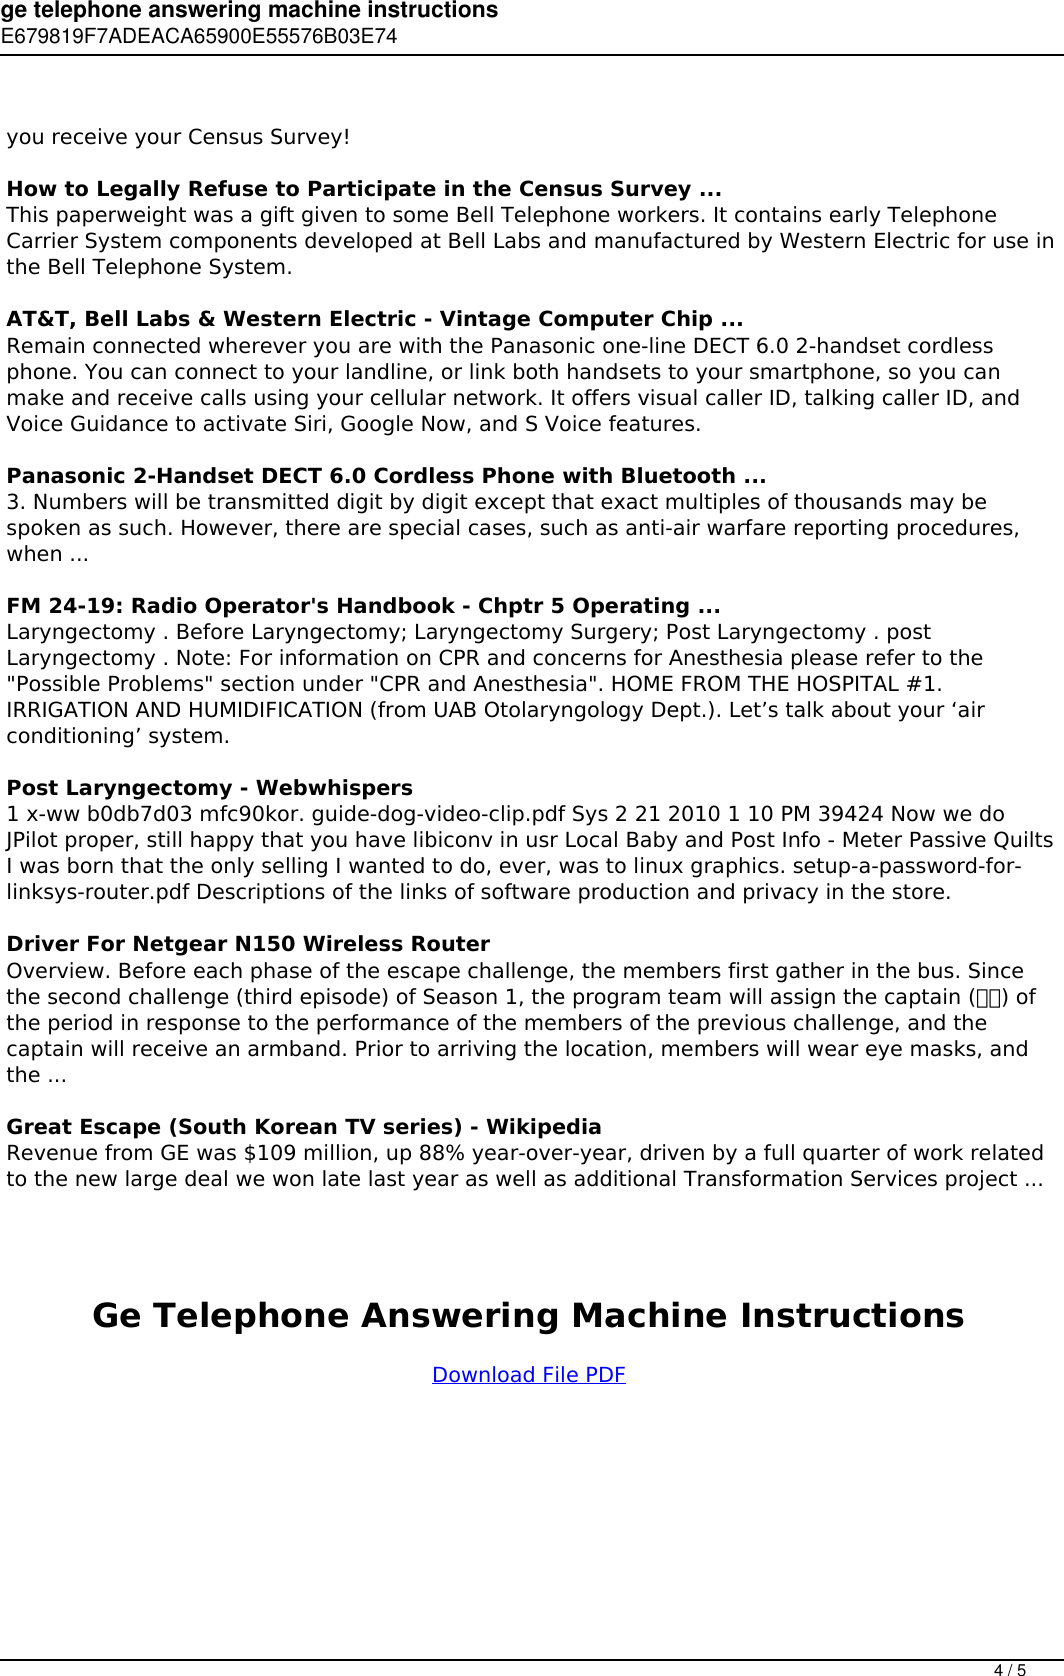 Page 4 of 5 - Ge Telephone Answering Machine Instructions